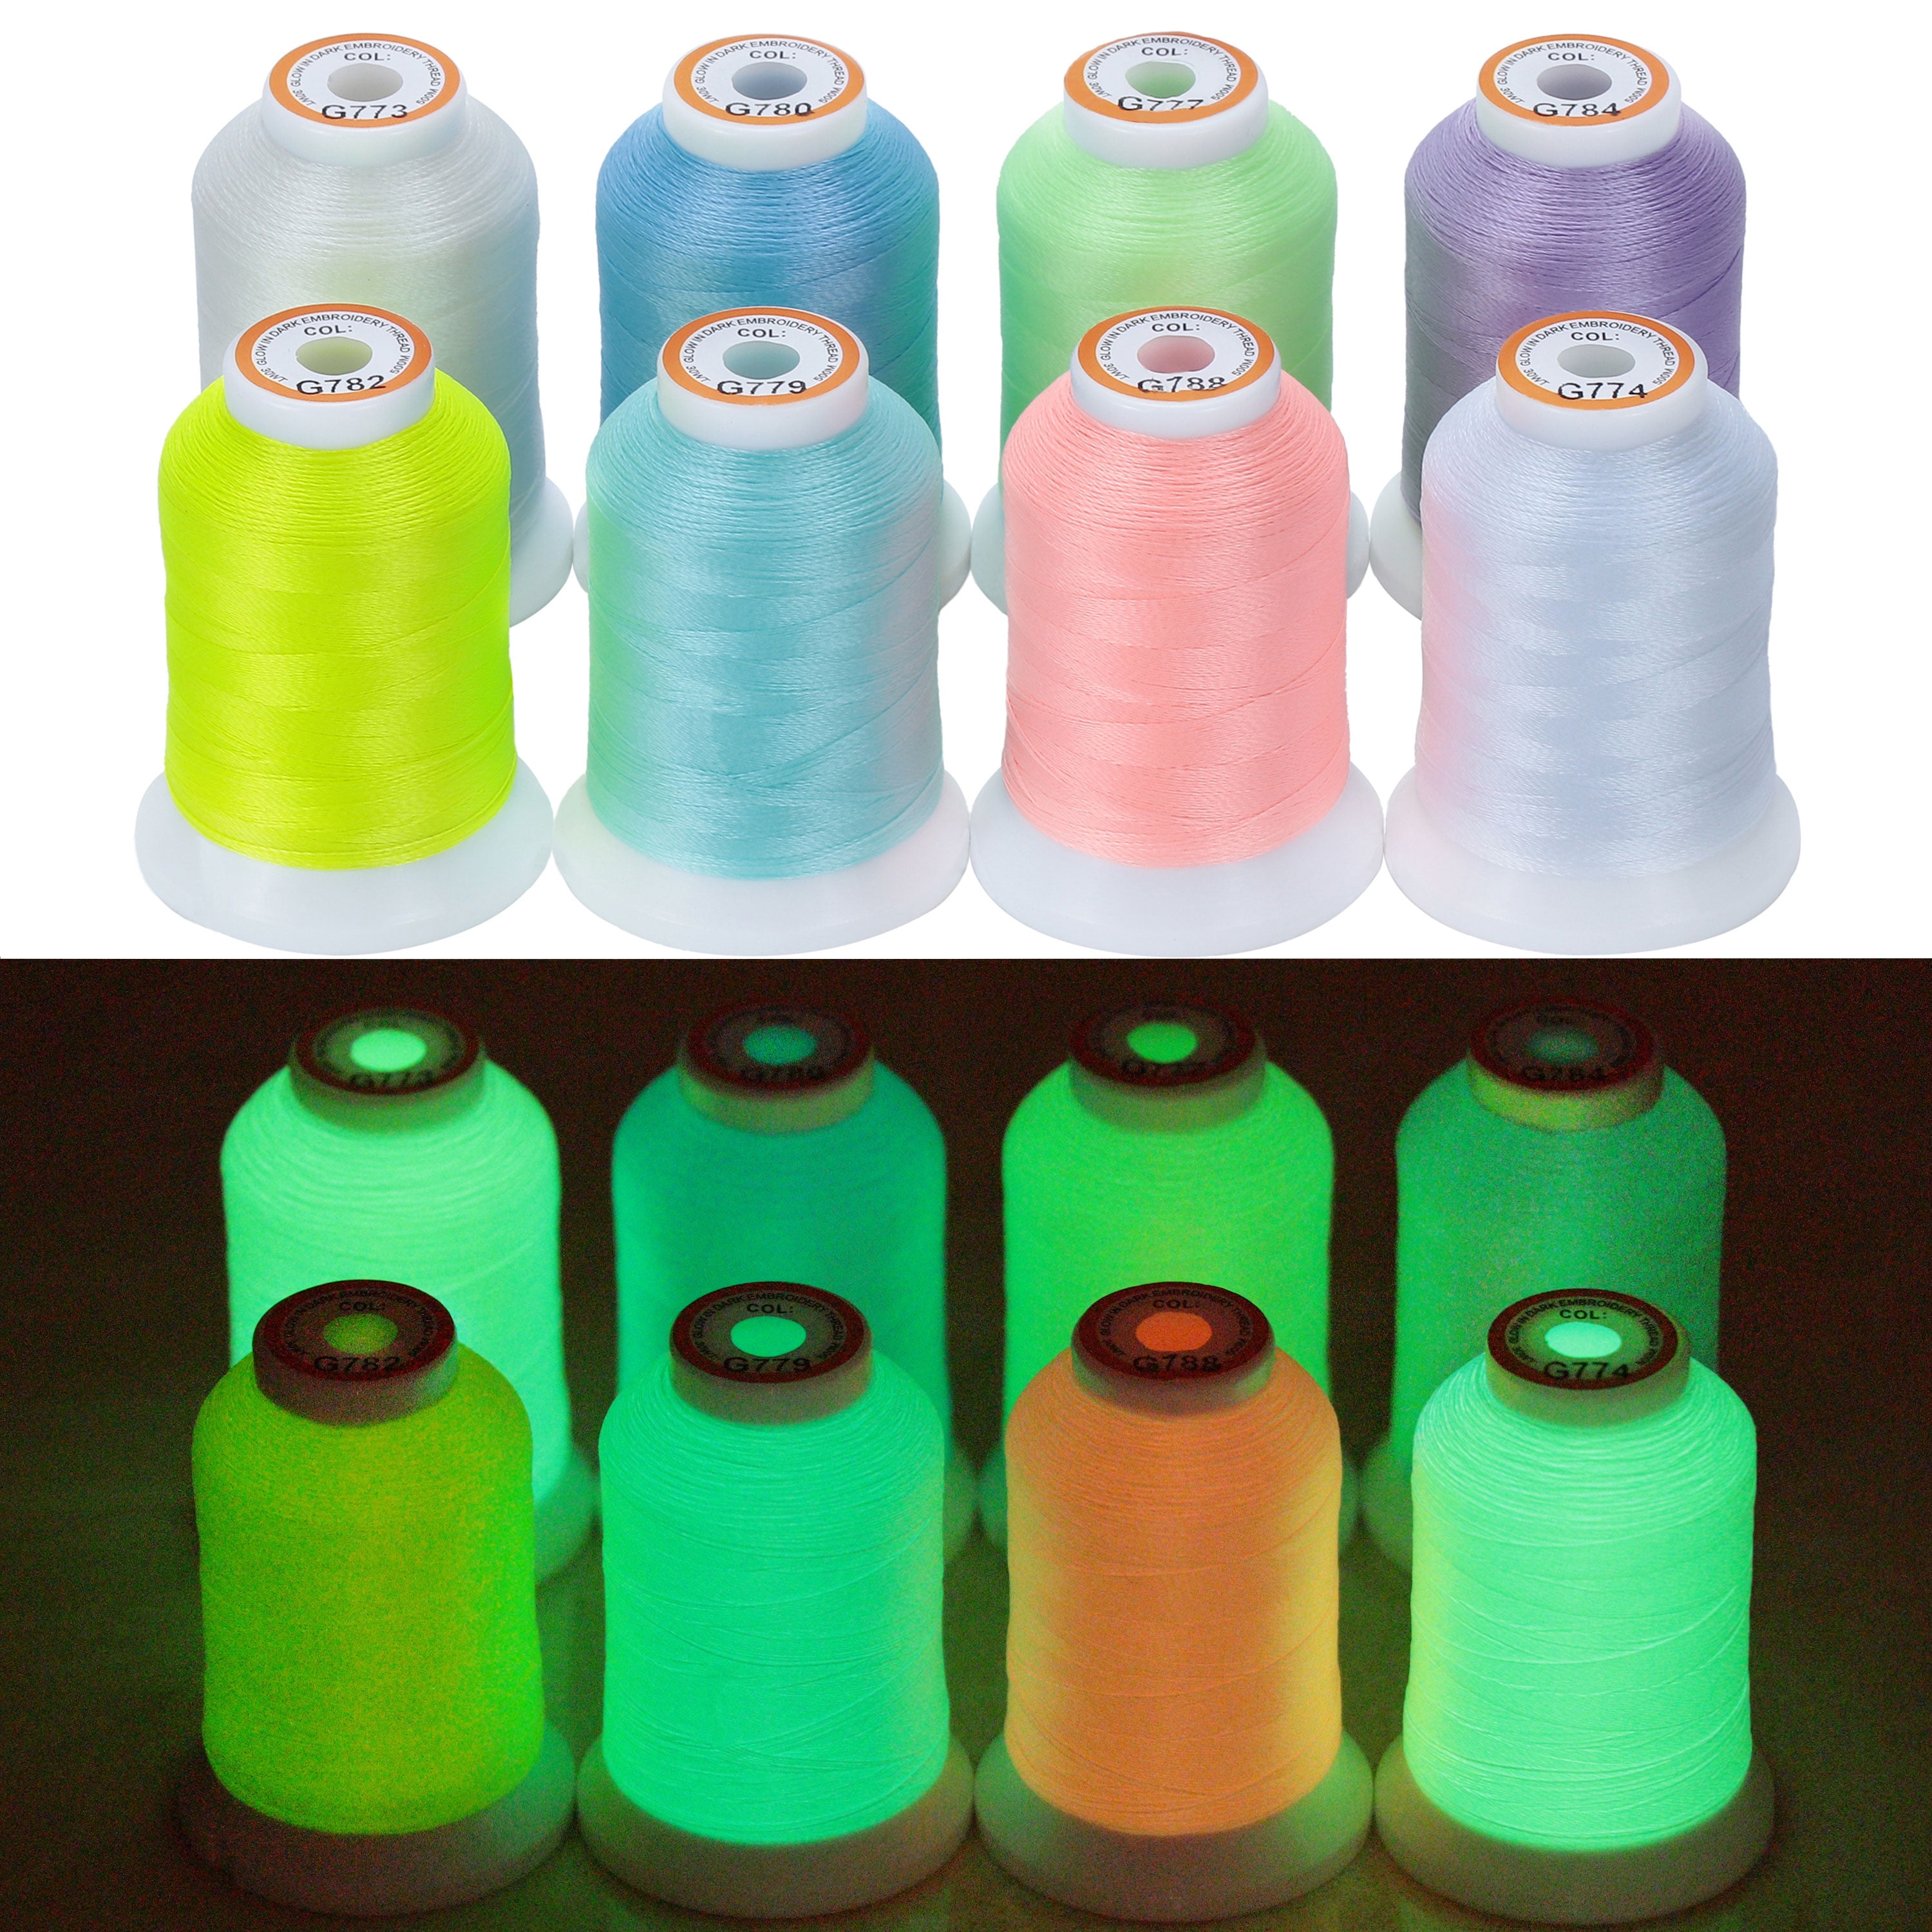 New brothread 8 Colors Luminary Glow in The Dark Embroidery Machine Thread  Kit 30WT 500M(550Y) Each Spool for Embroidery, Quilting, Sewing 